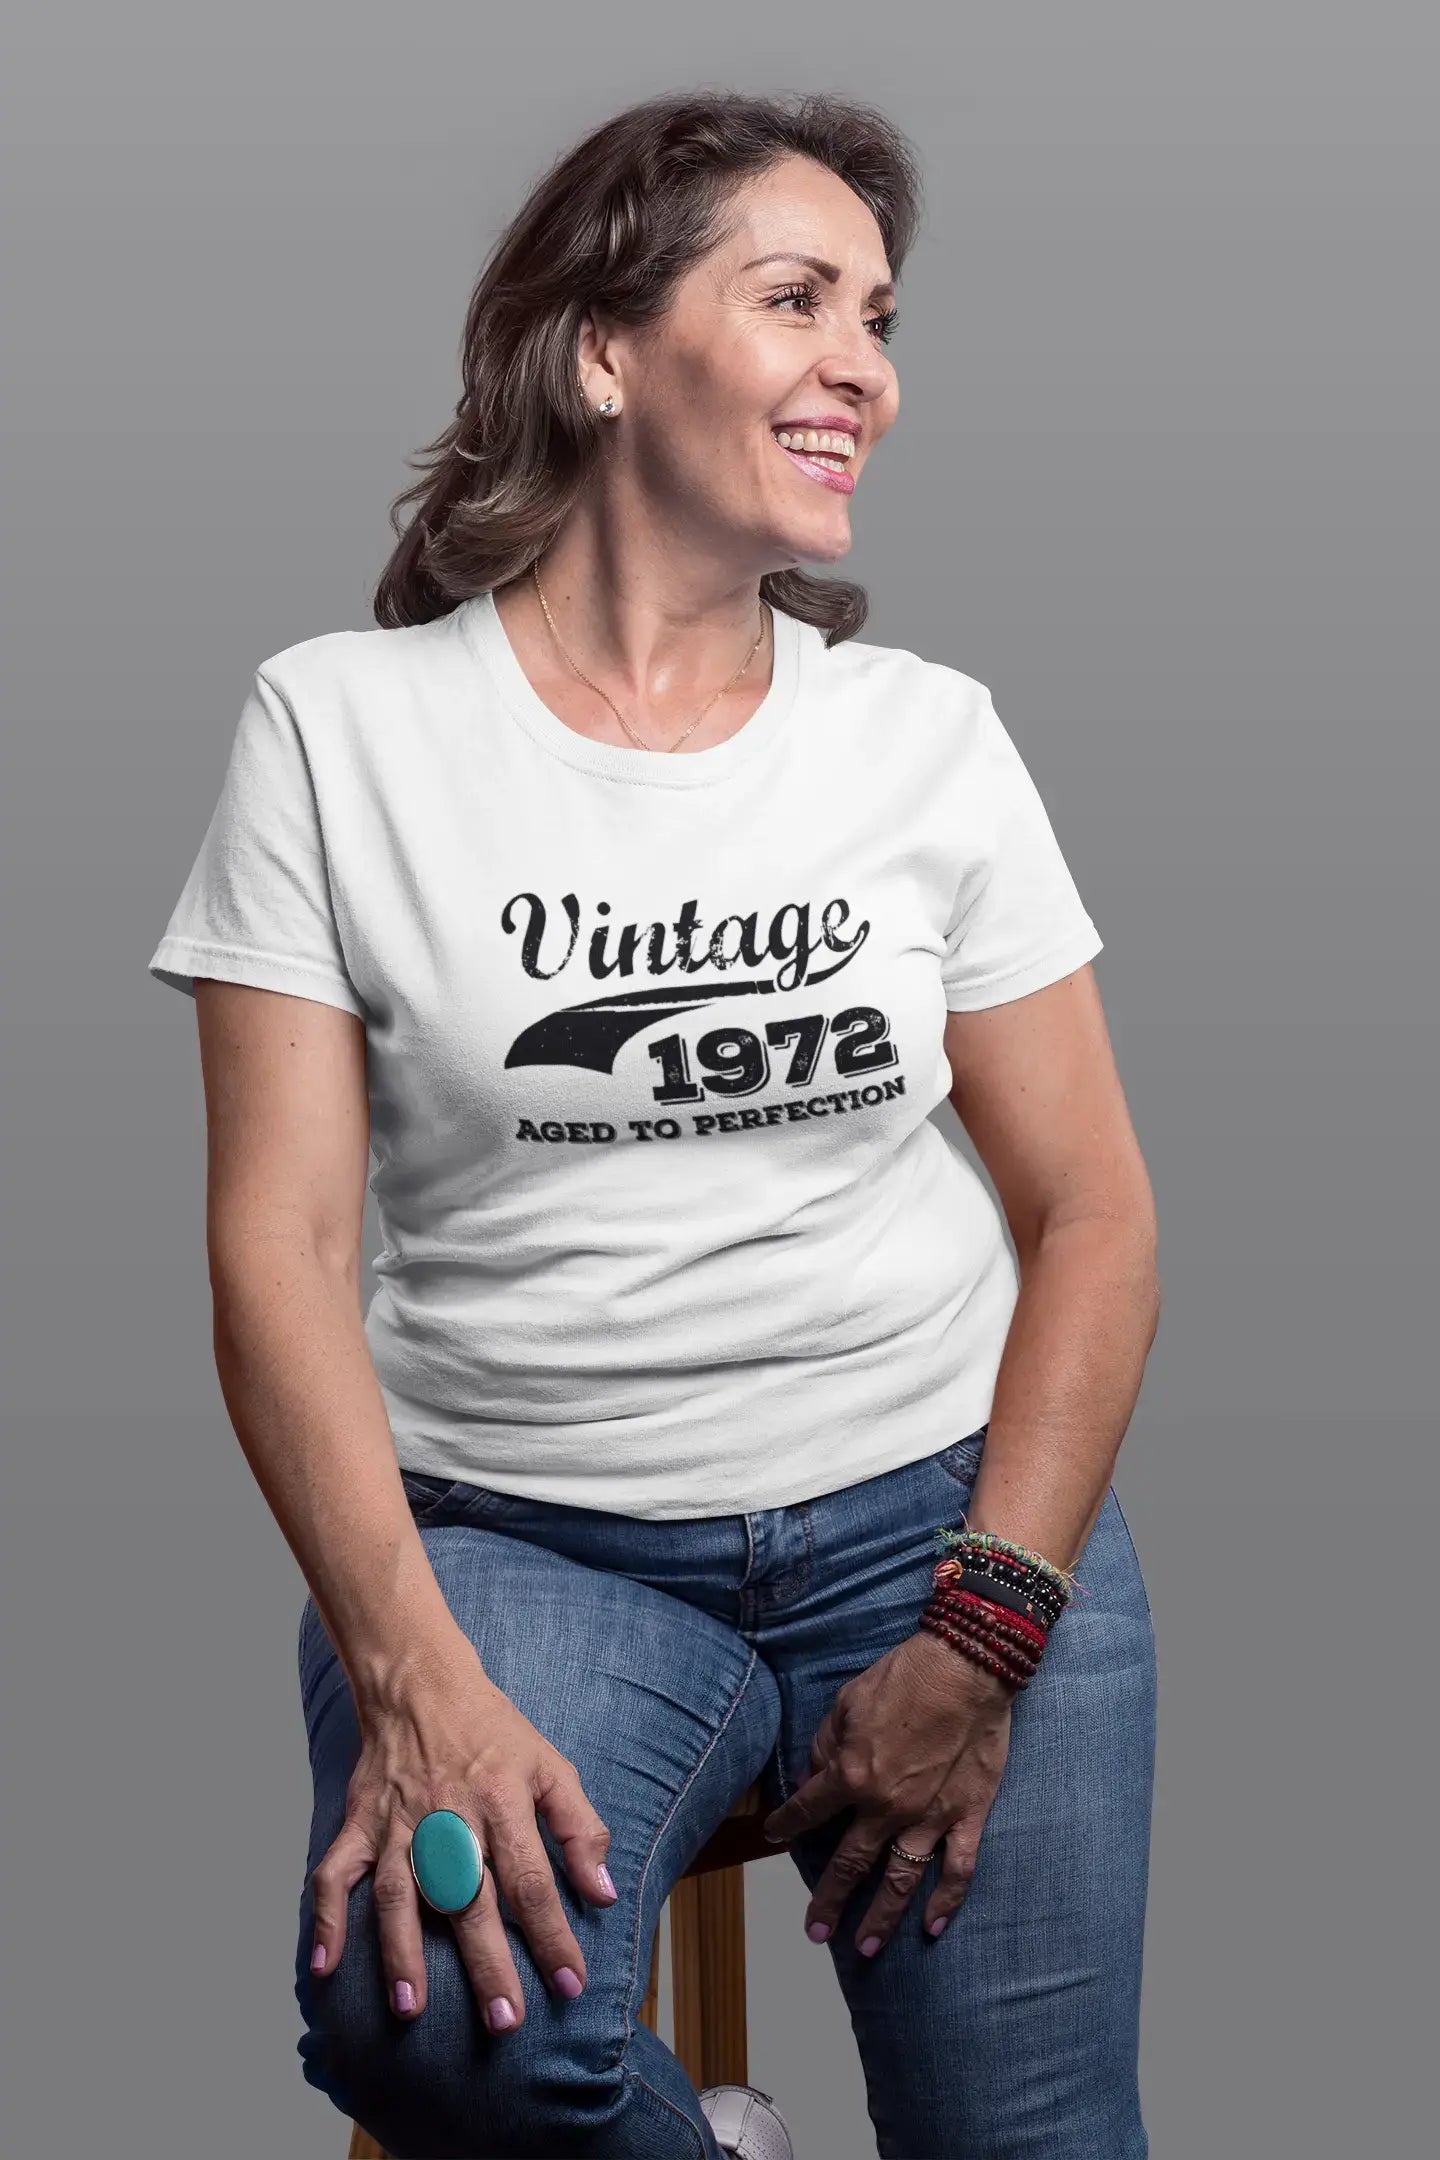 Femme Tee Vintage T Shirt Vintage Aged to Perfection 1972